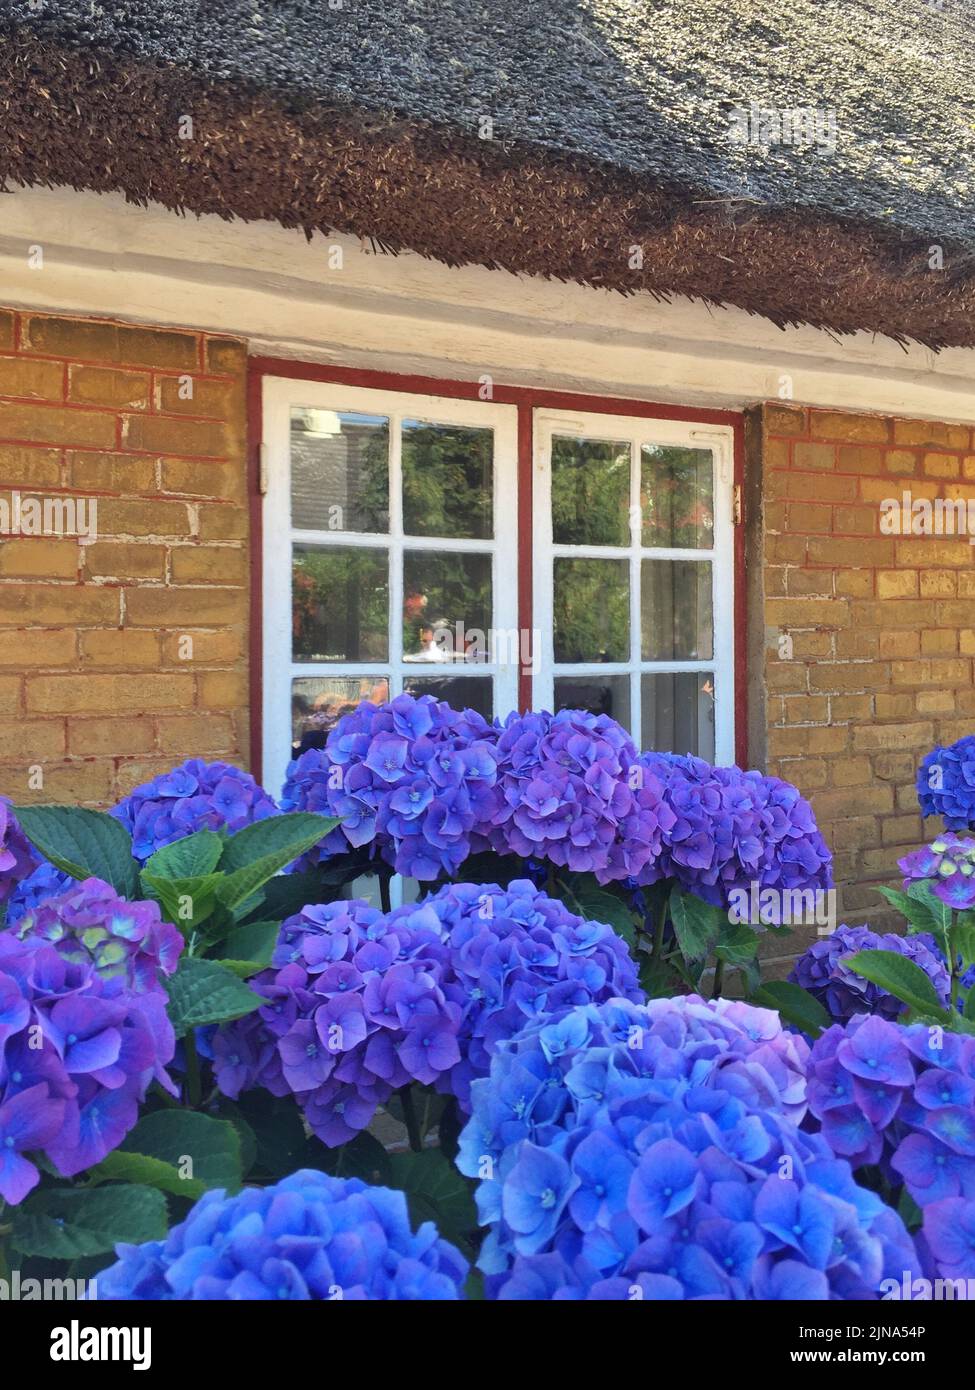 Purple hydrangea flowers growing in front of a typical traditional thatched house, Fanoe, Jutland, Denmark Stock Photo